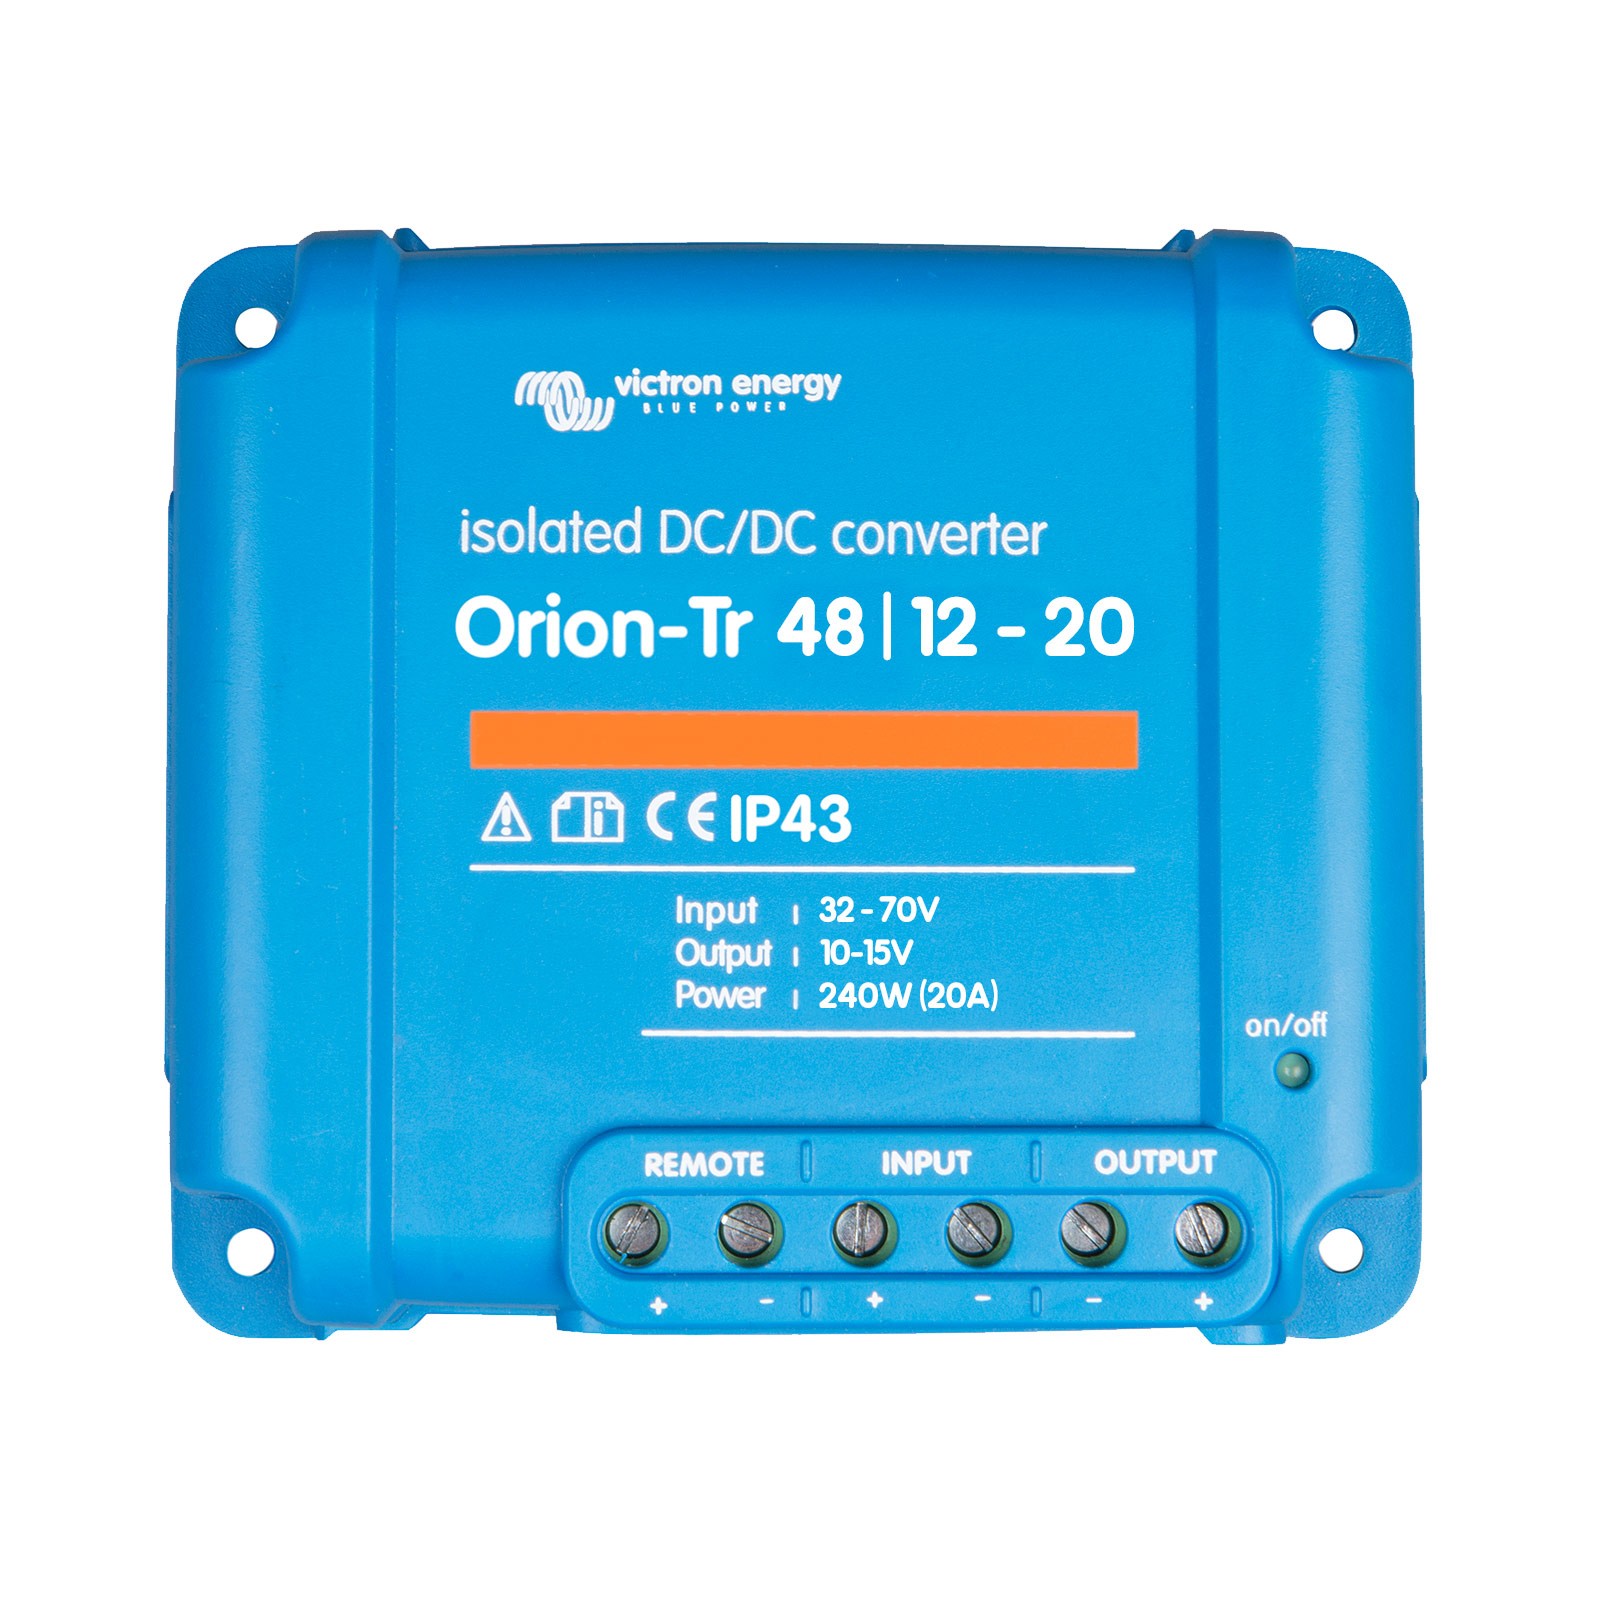 Isolierter Konverter Orion-Tr 48/12-20 A Victron Energy